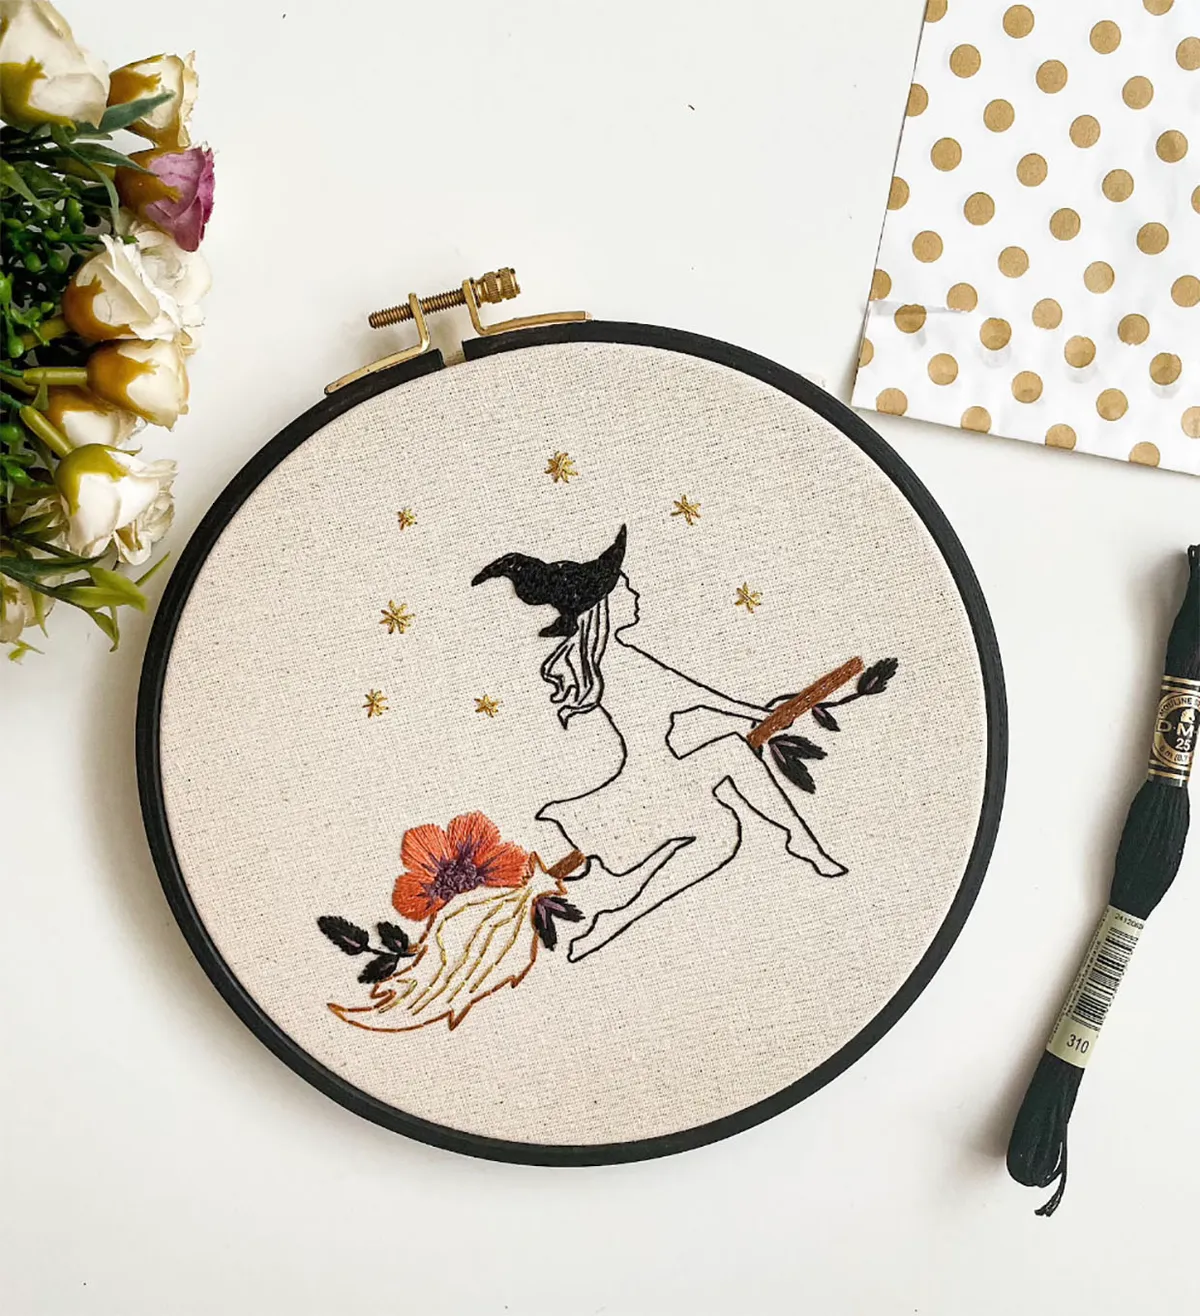 Halloween sewing patterns – witch embroidery hoop